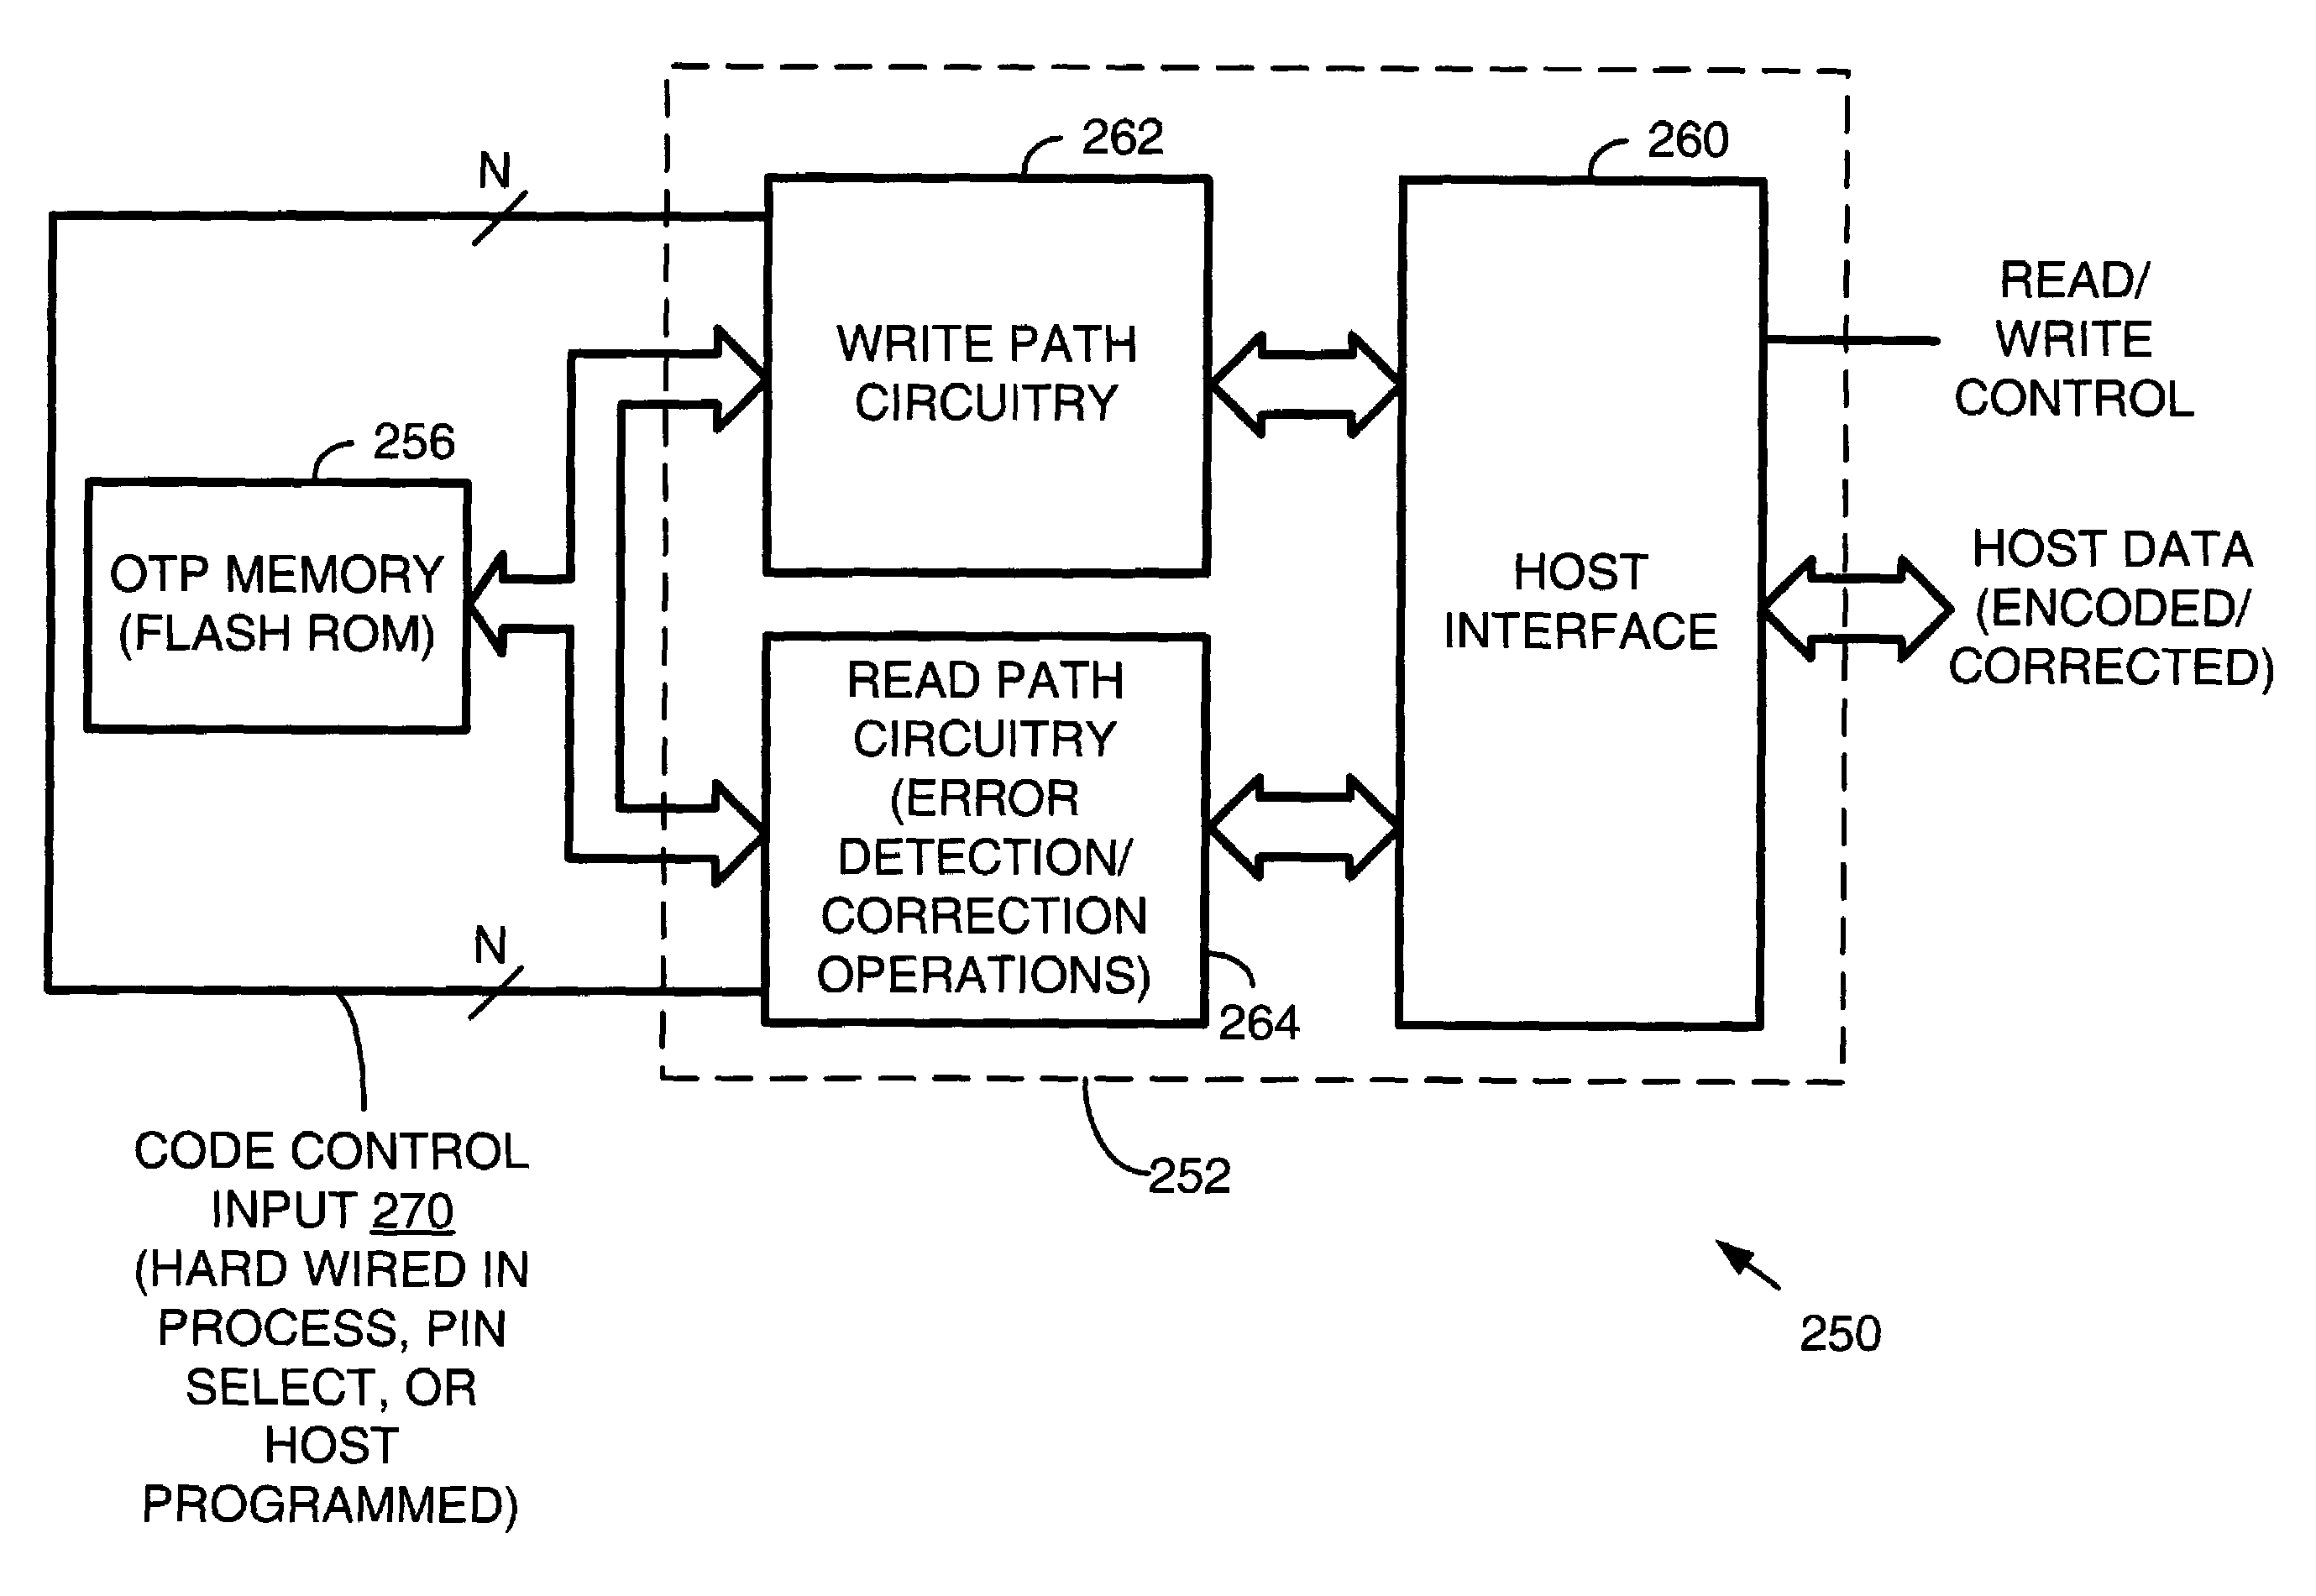 Variable Hamming error correction for a one-time-programmable-ROM